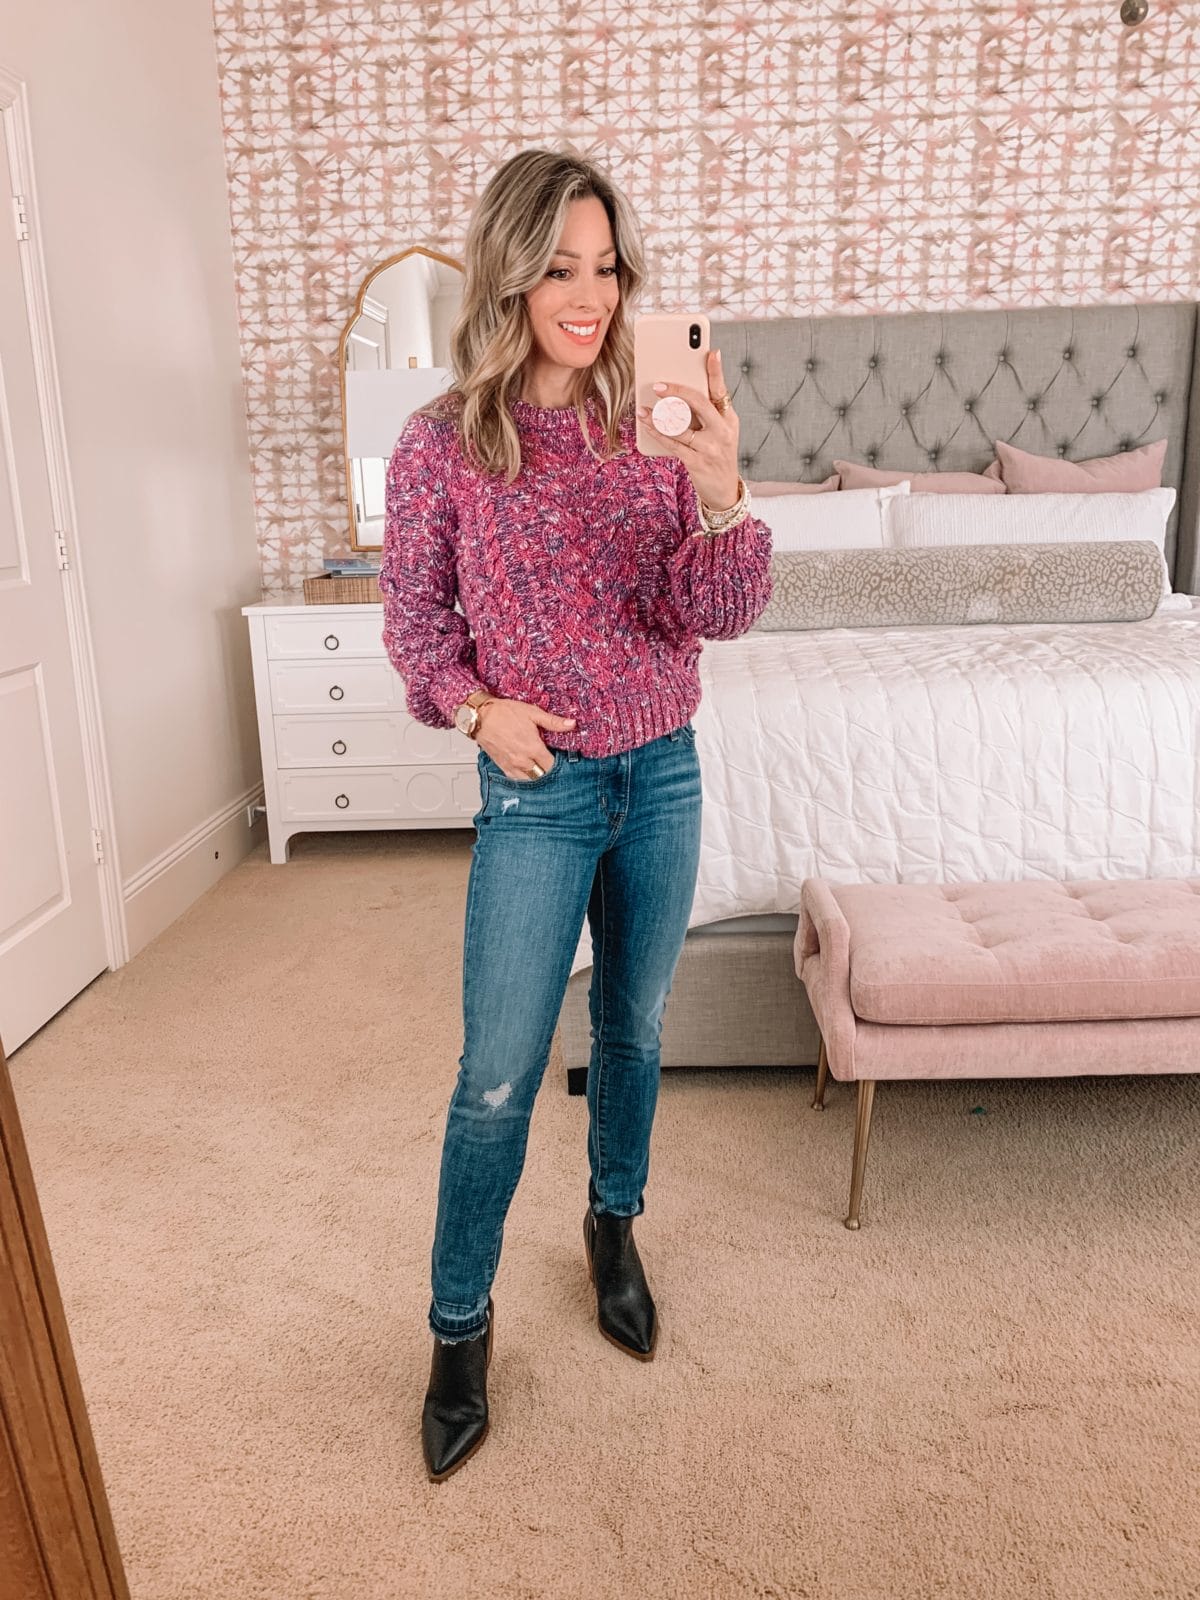 Amazon Fashion Faves, Pink Sweater, Jeans, Booties 